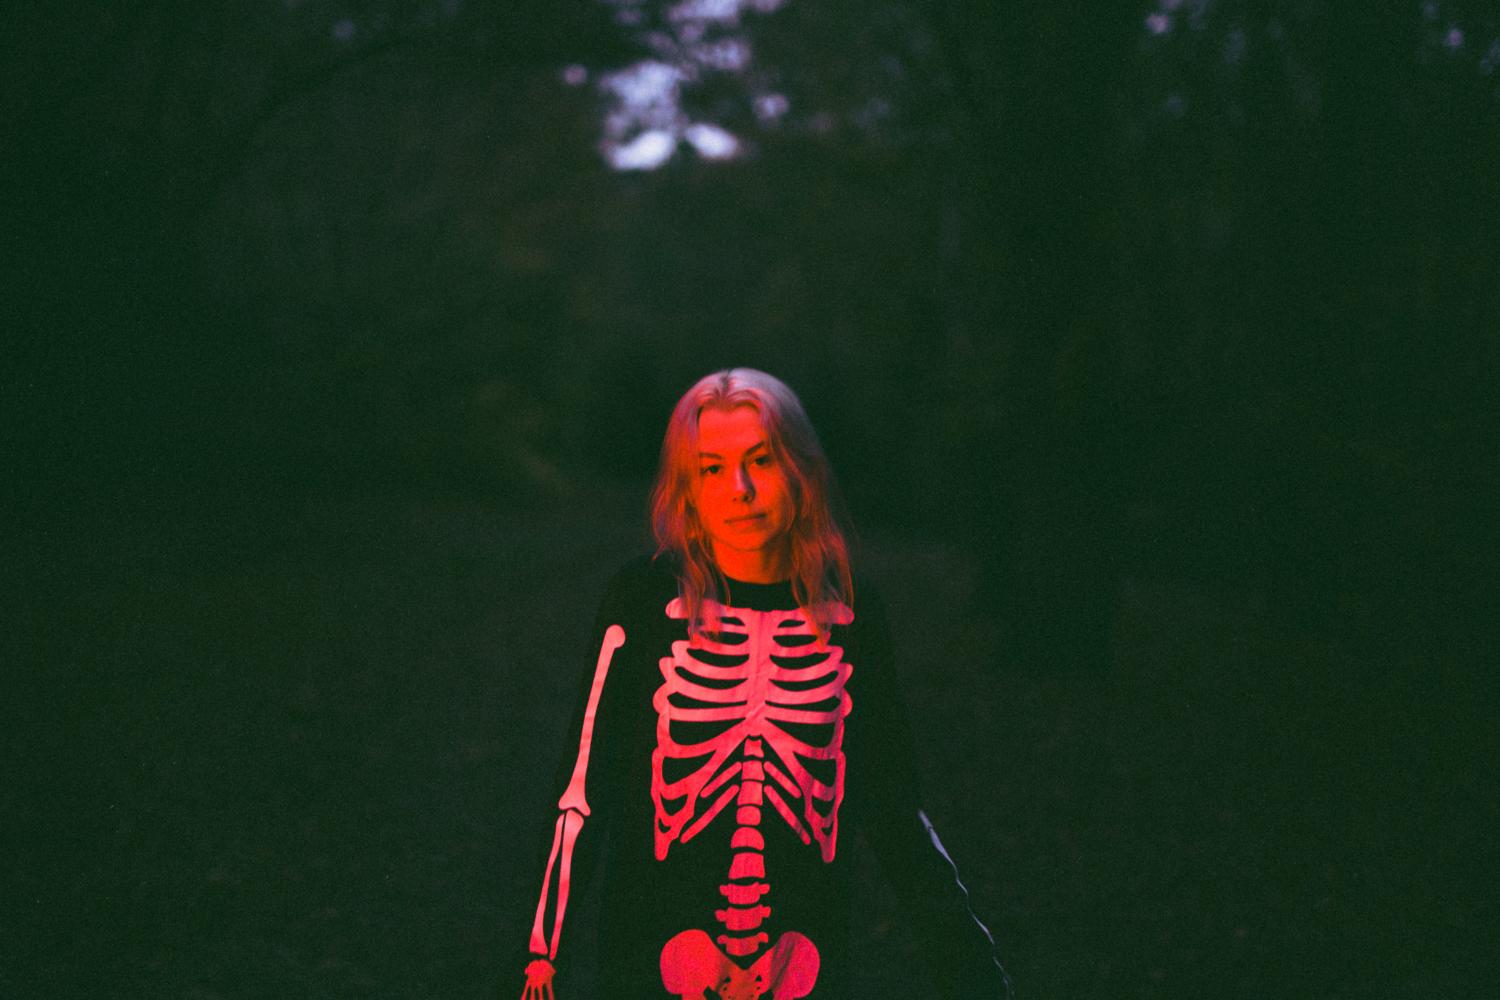  Phoebe Bridgers has slowly gained a popular following for her experimental indie-rock music from previous years. For her recent album, she has put that music on display for people to relate to. Rating: BPhoto Credit: Olof Grind